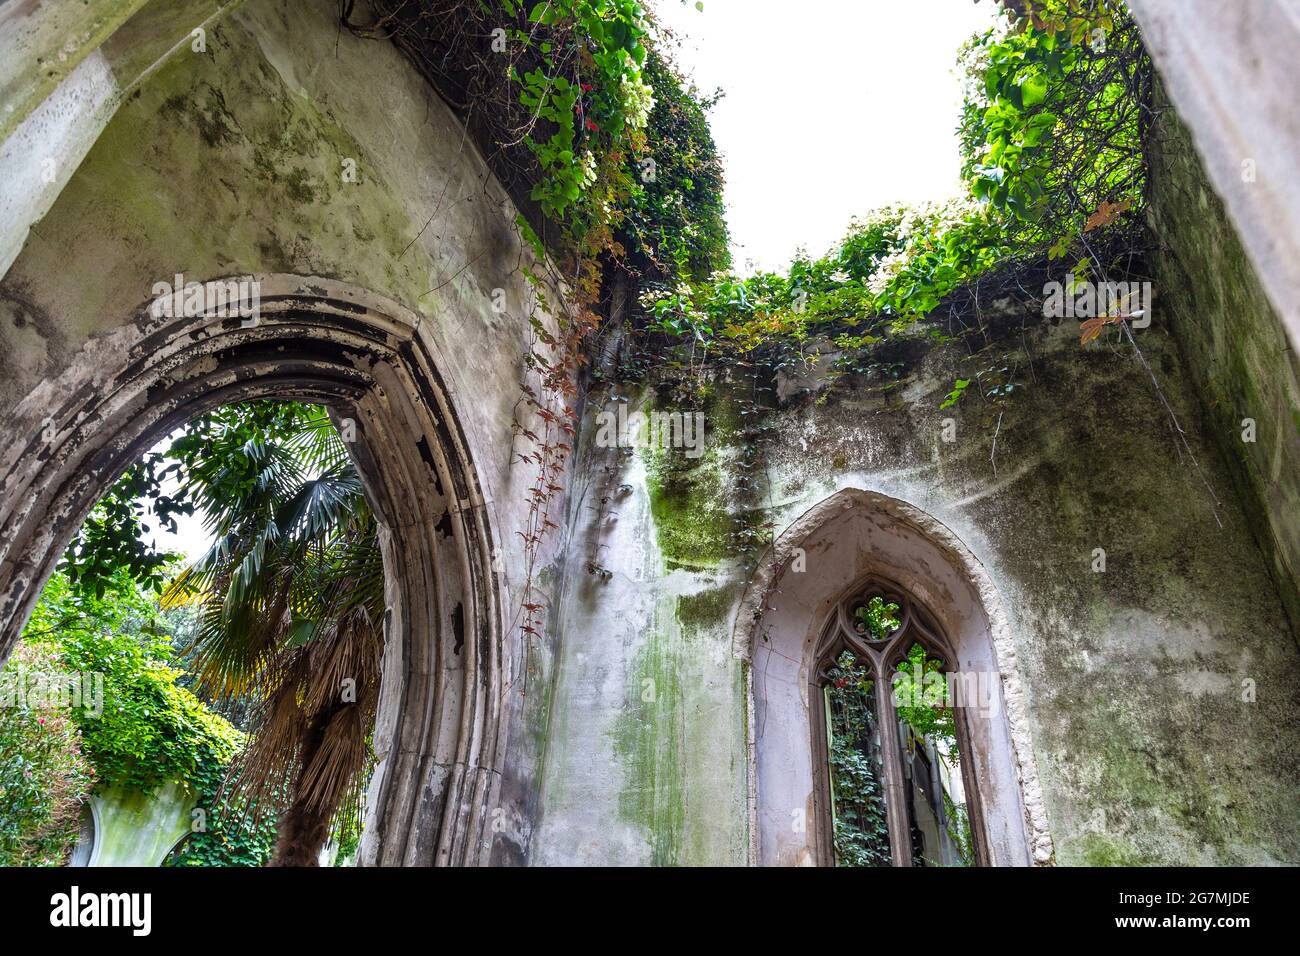 Ruin of St Dunstan in the East church damaged in the Blitz, now converted into a public garden, London, UK Stock Photo